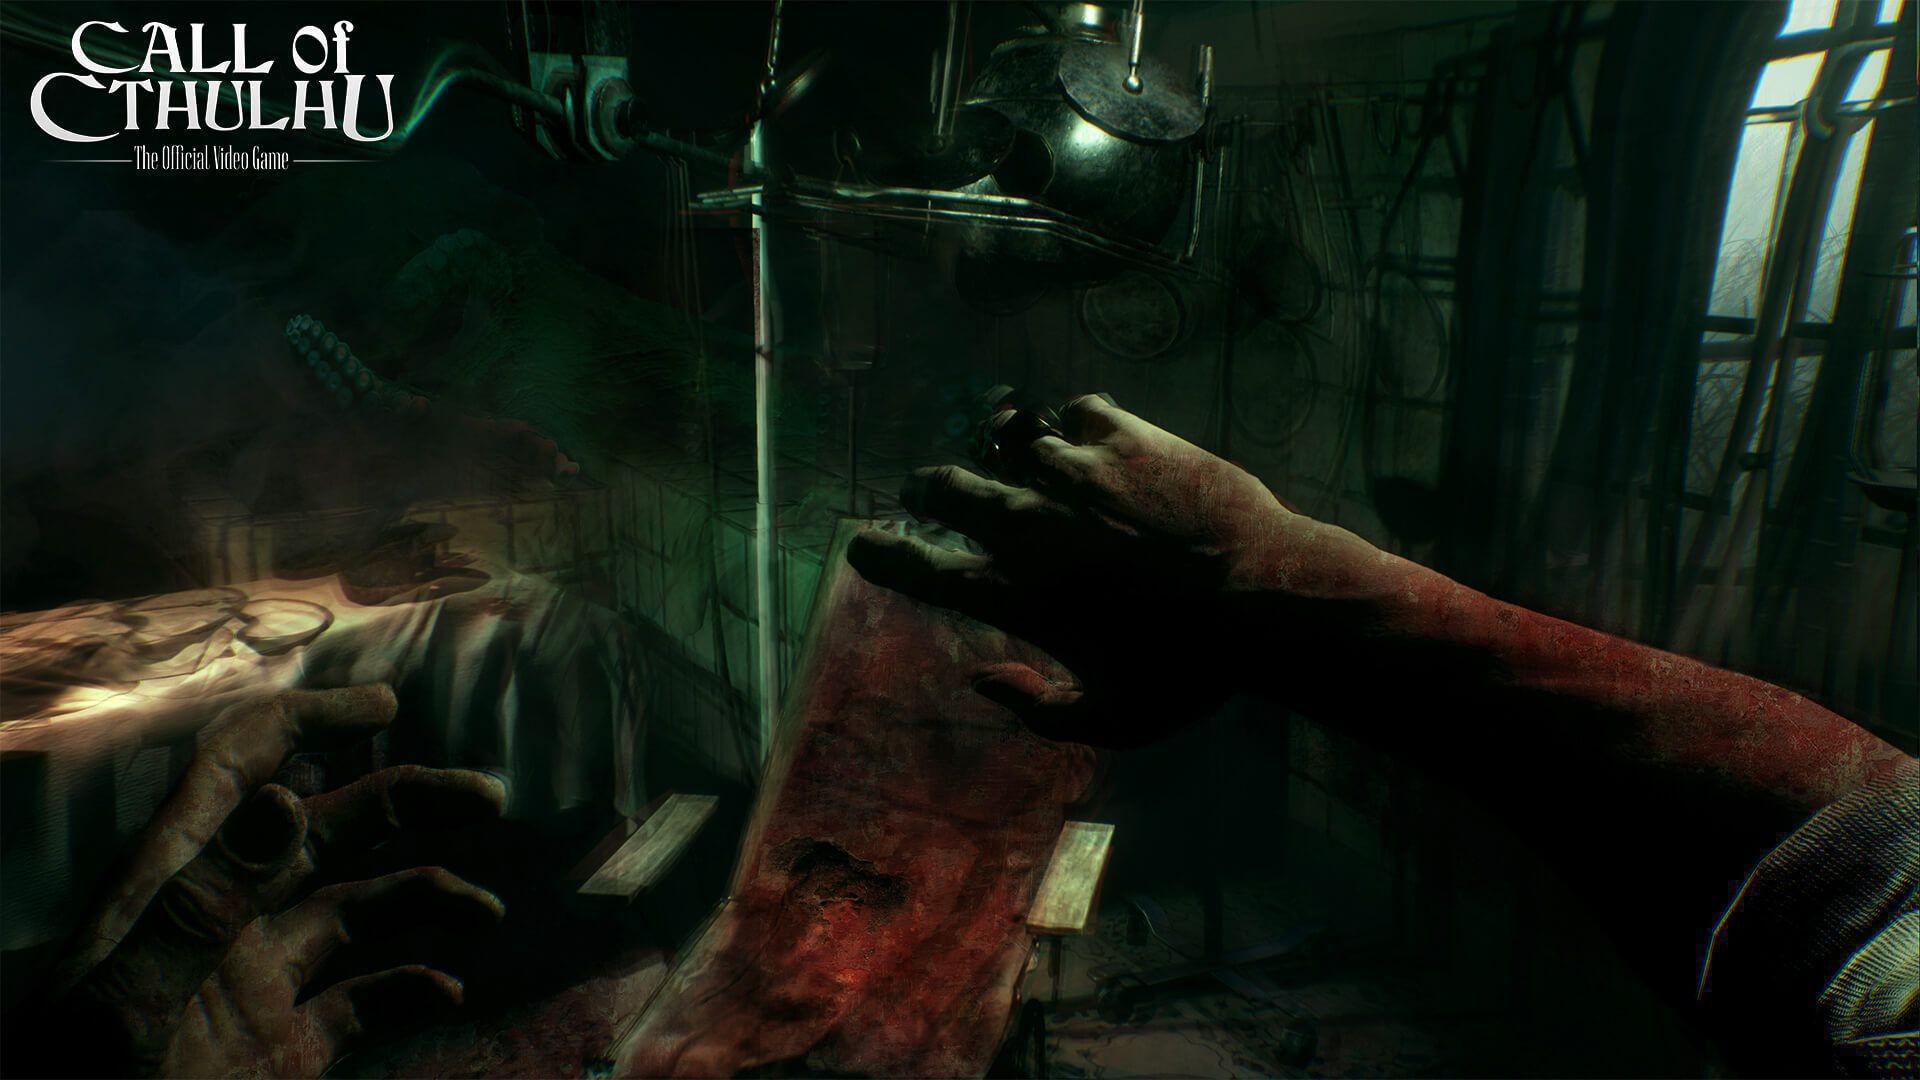 1920x1080, Call Of Cthulhu Background 
 Data Id 18019 - Call Of Cthulhu The Official Video Game - HD Wallpaper 